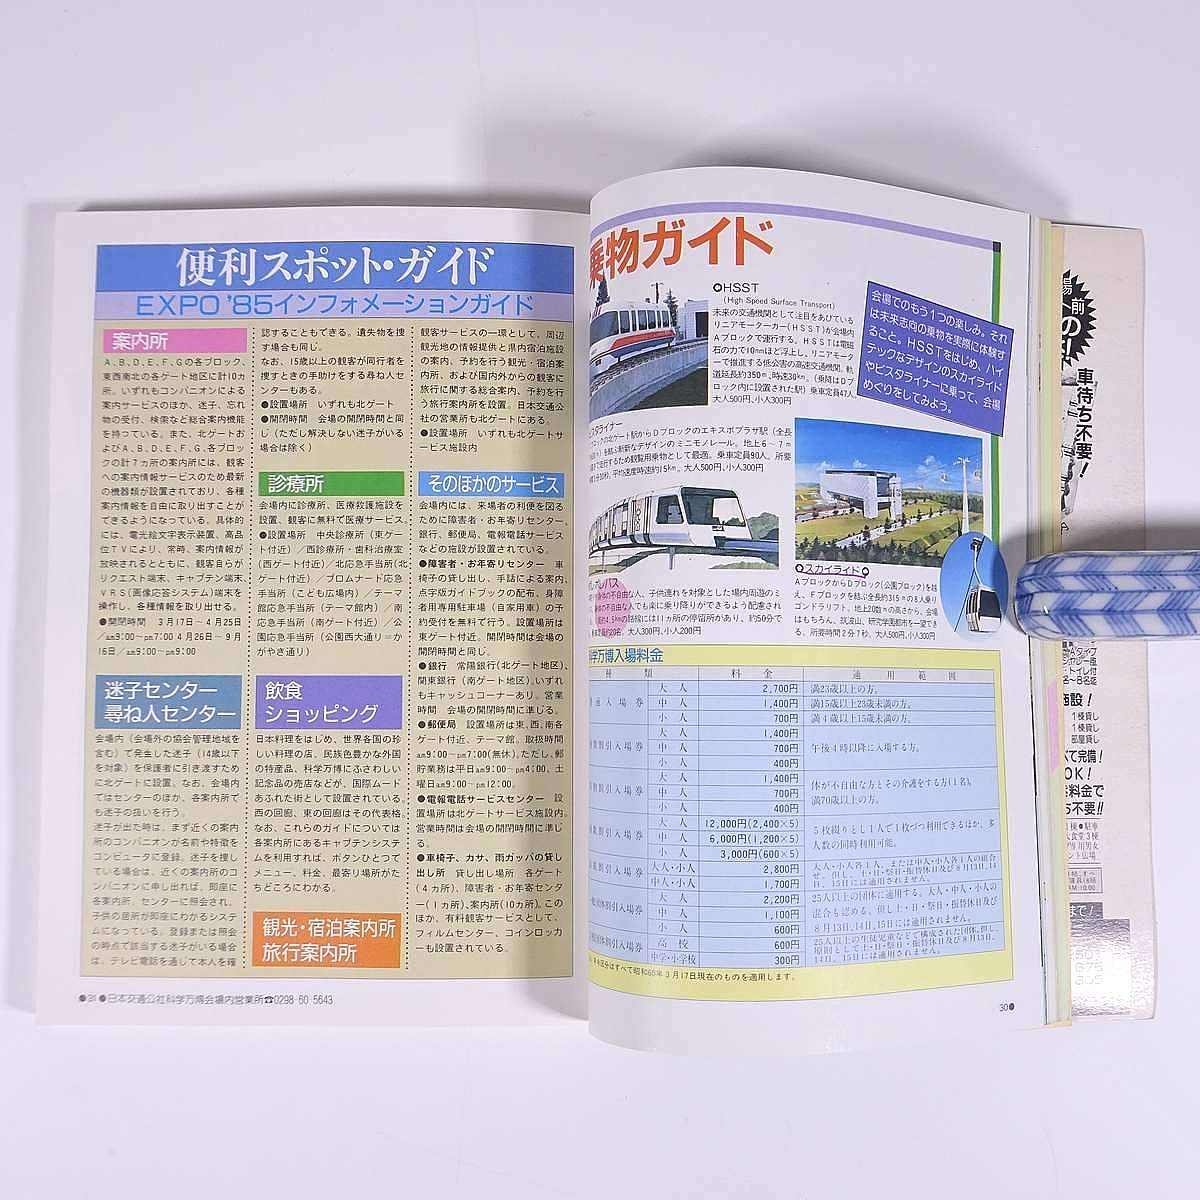  science ten thousand .. . Tsukuba *85. viewing hall * Event guide * Kanto around line comfort guide jtb Japan traffic . company 1985 separate volume international science technology . viewing . guidebook 